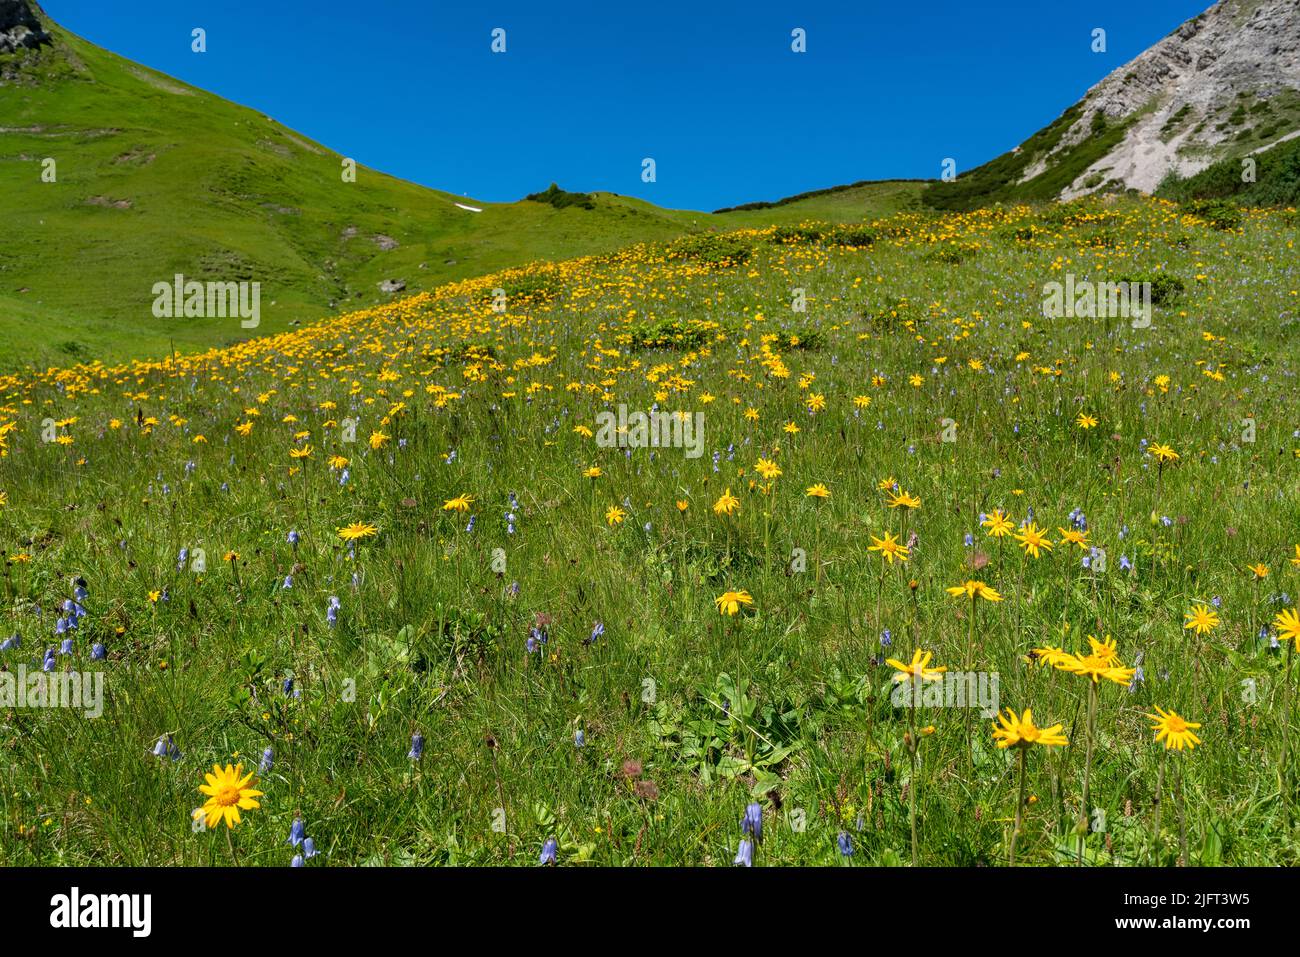 beautiful flower-strewn mountain meadows with orange-yellow arnica and many other flowers. Alpine plants bloom on the steep slope. landscape Stock Photo